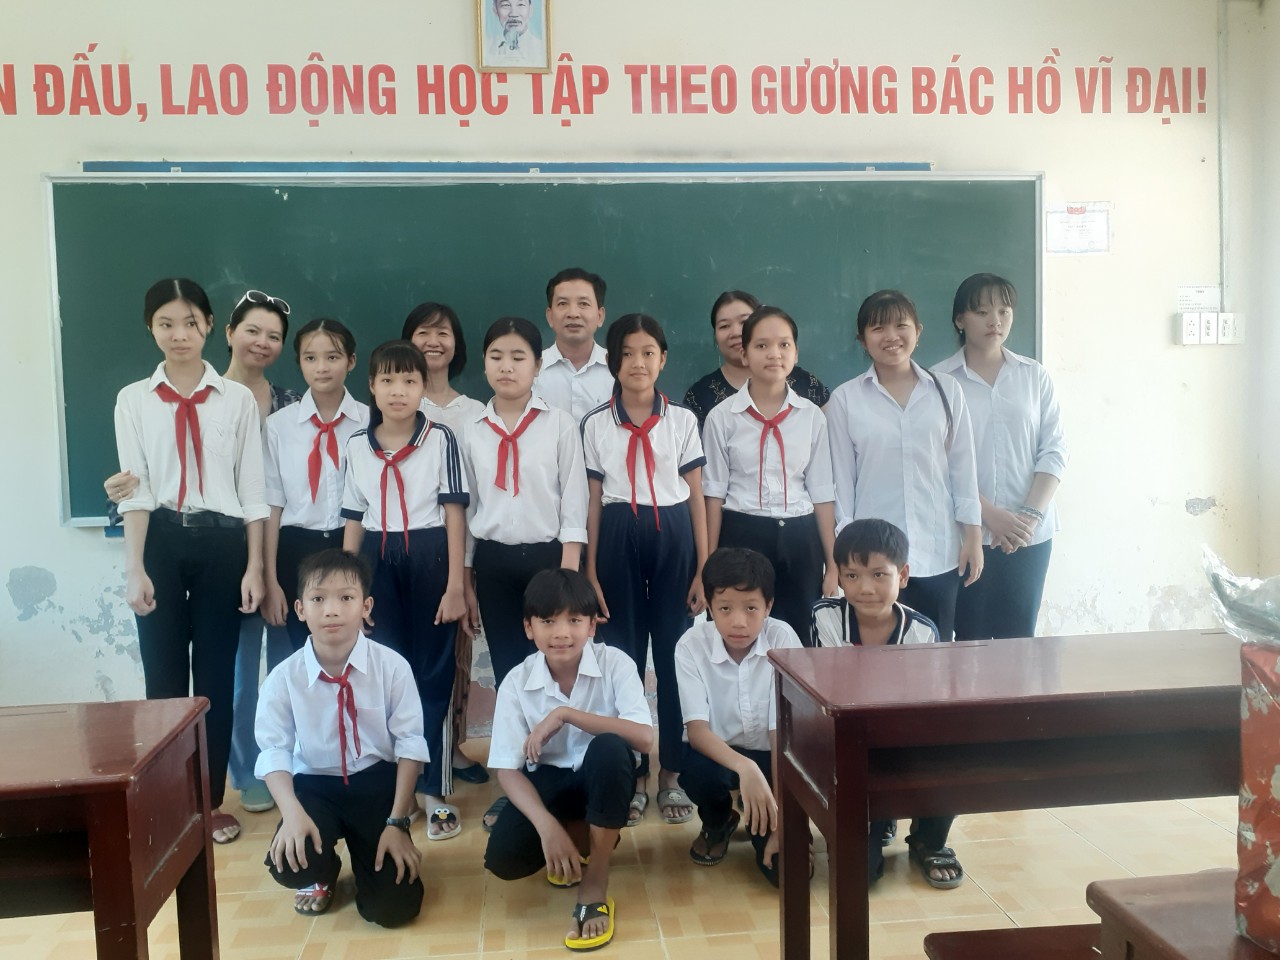 Mr. Nguyen Van Nhan – Chairman of Hau Giang province Union of Friendship Organizations with Thanh Loc Organization grants  scholarships to poor students.